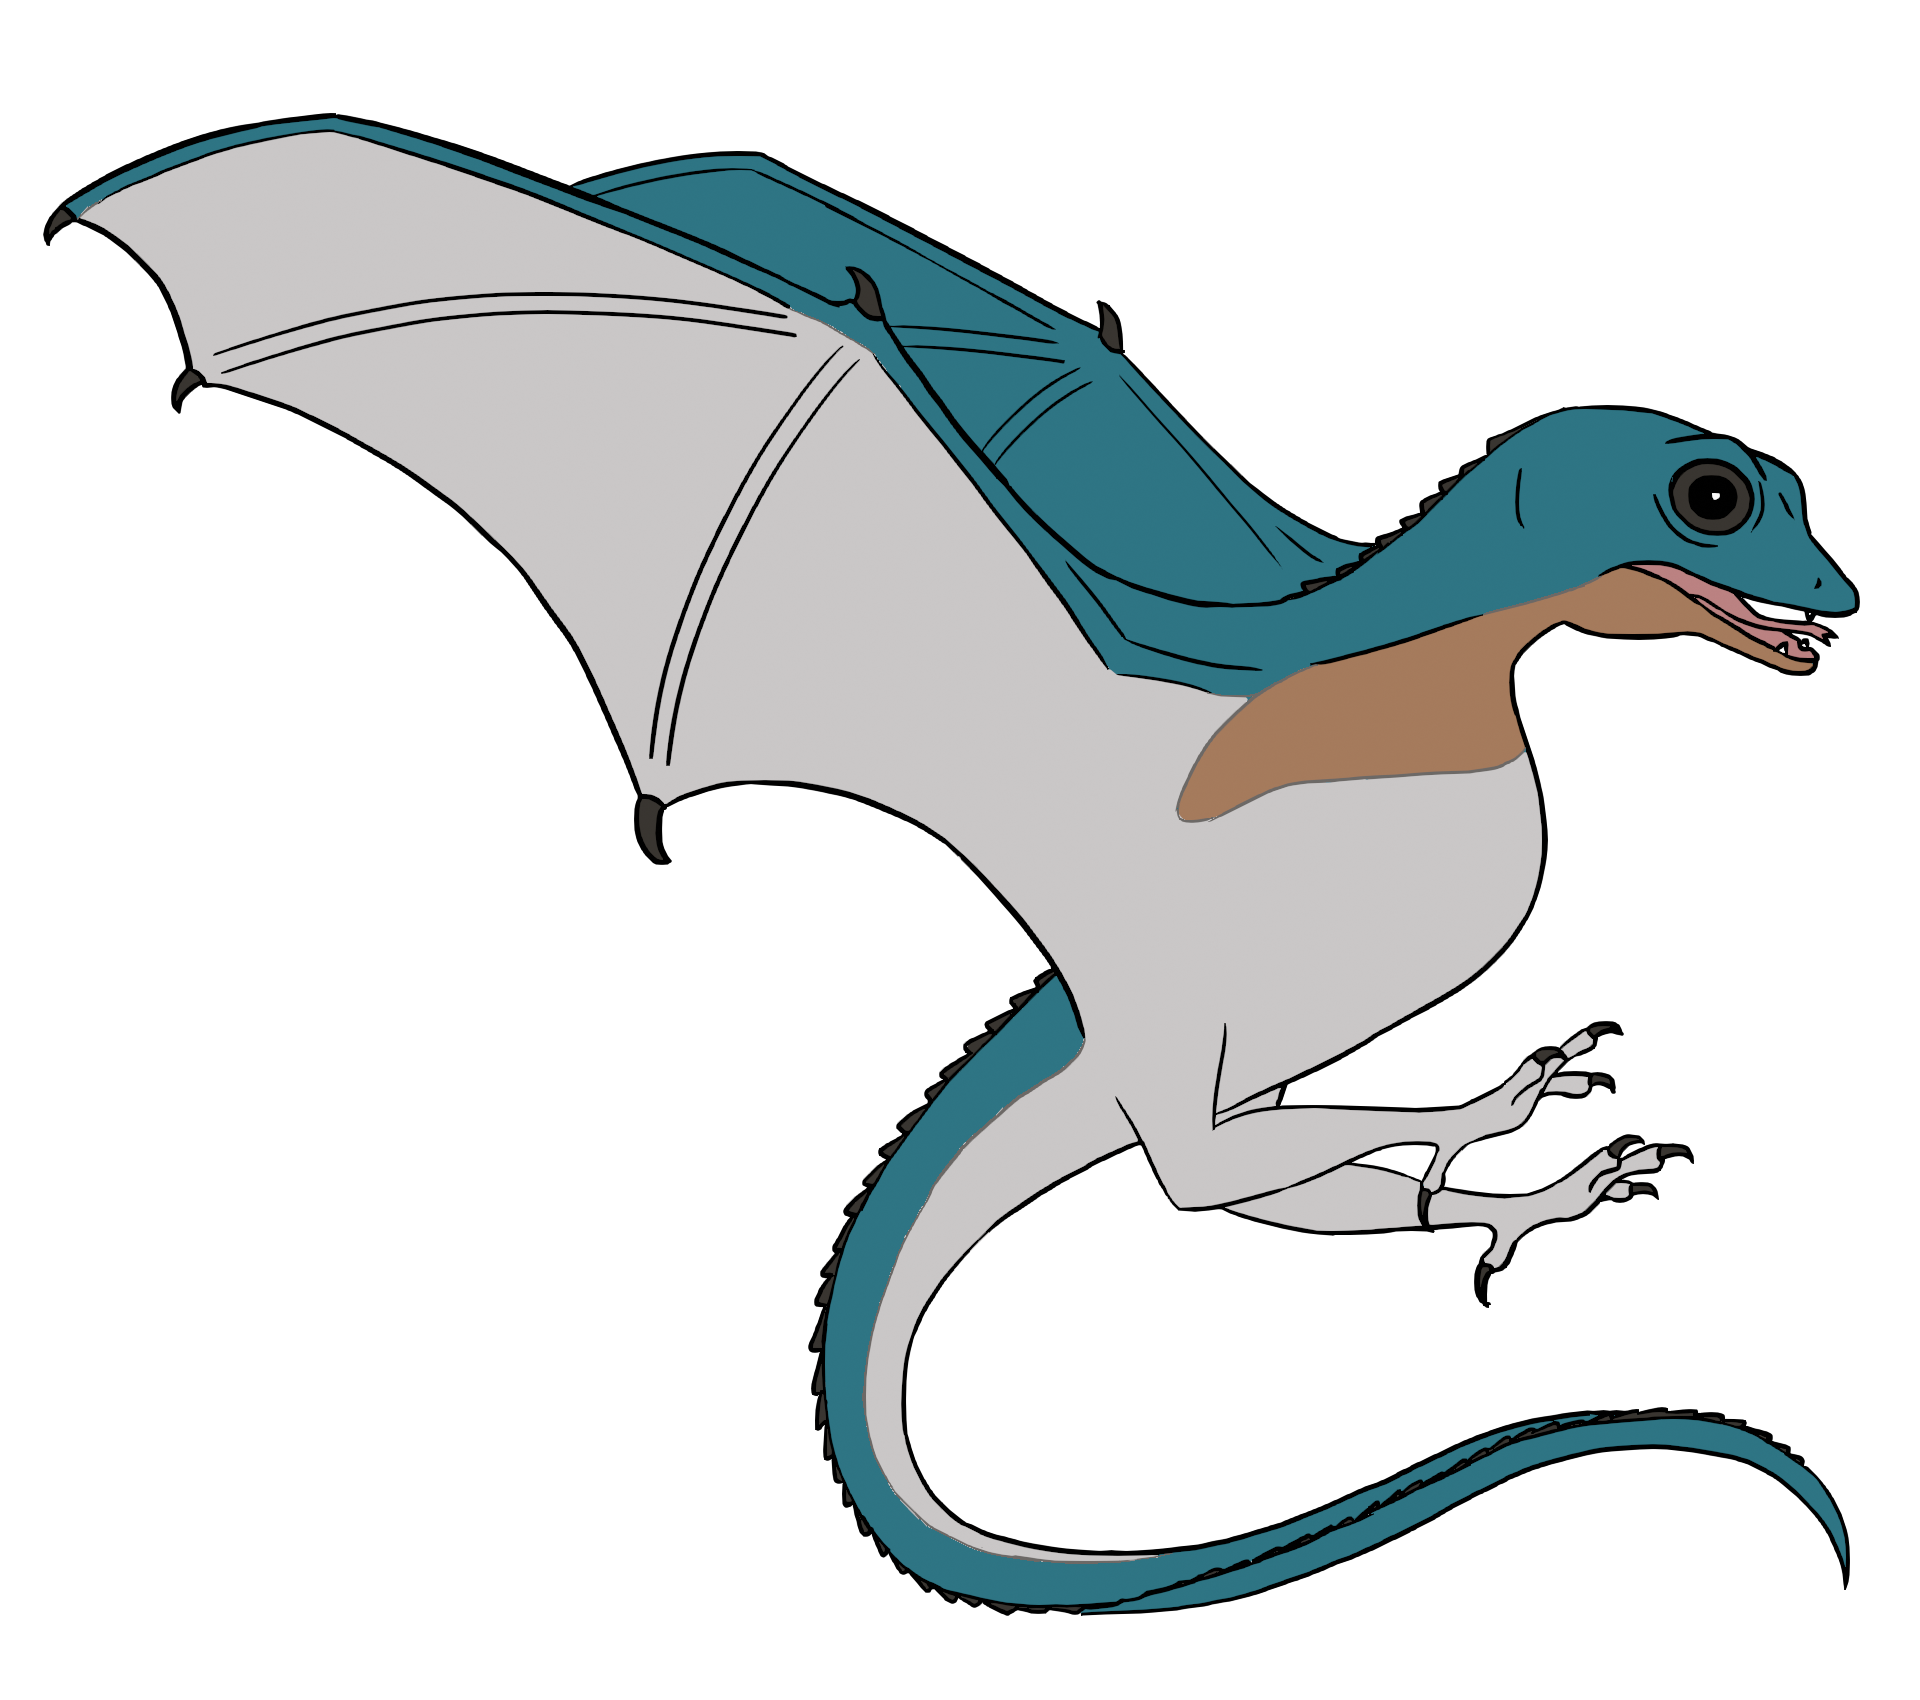 a digital drawing of a blue, orange, and white wyvern